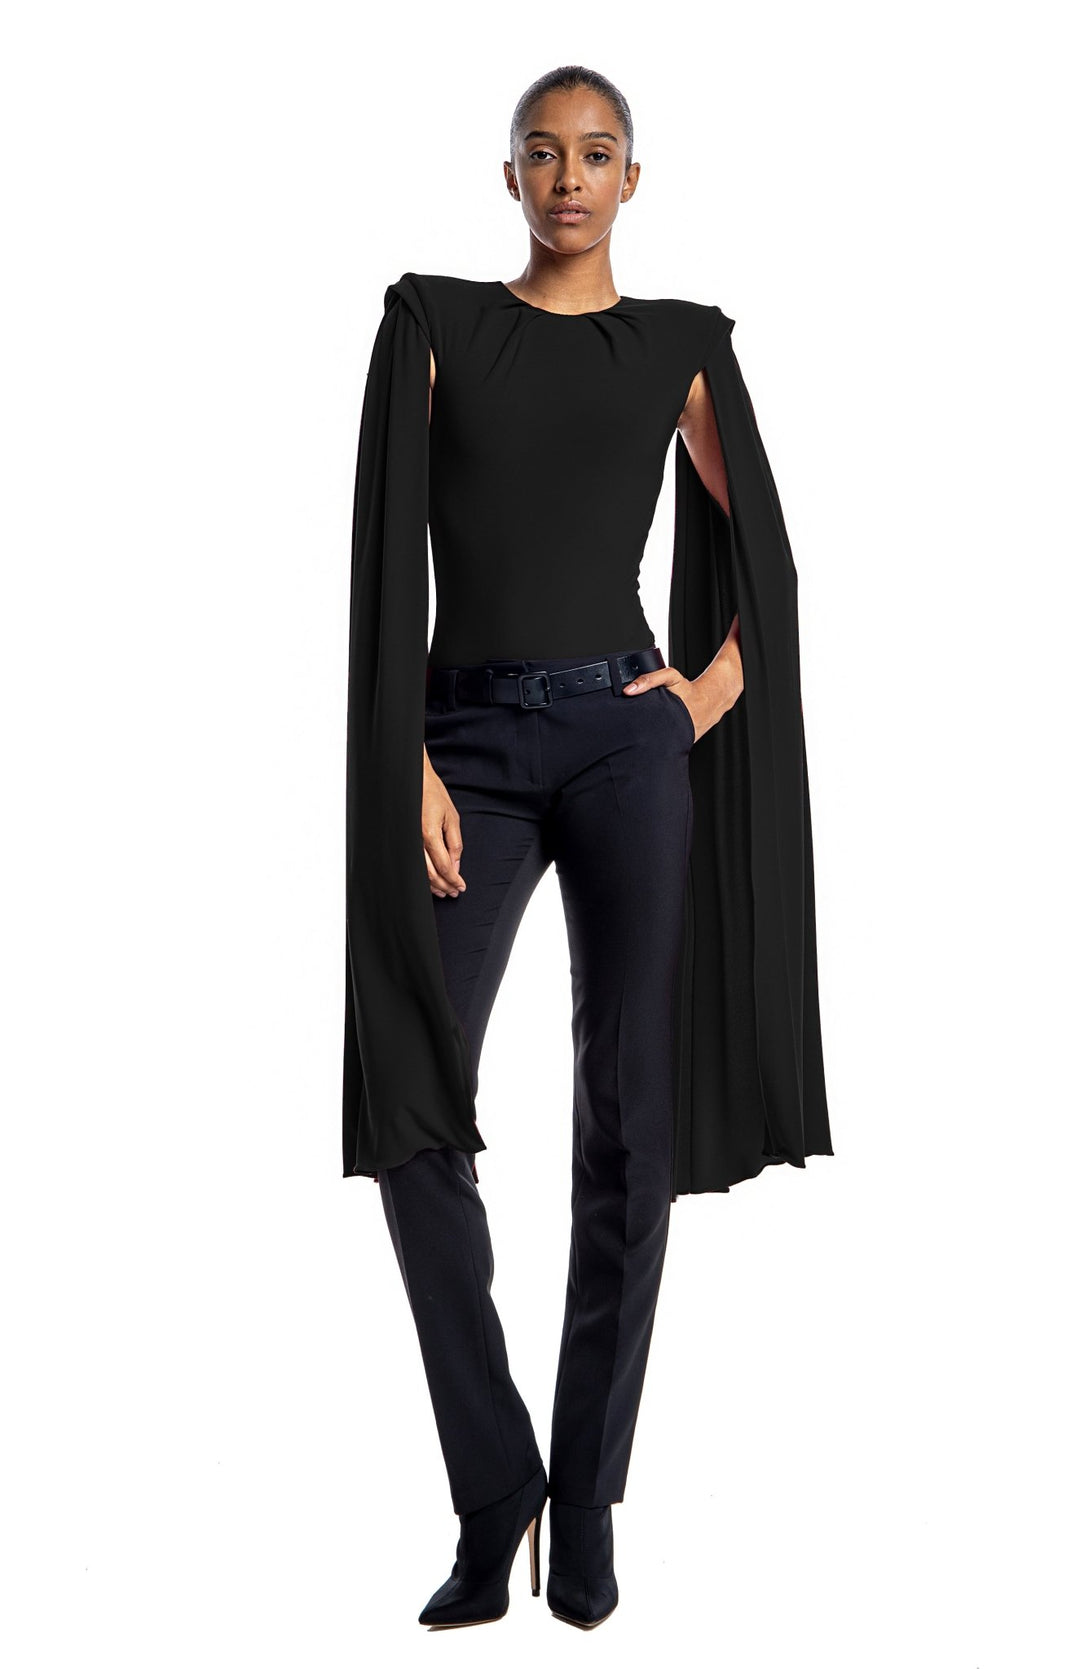 Elegant, black, draped bodysuit with shoulder pads and oversized cape sleeves